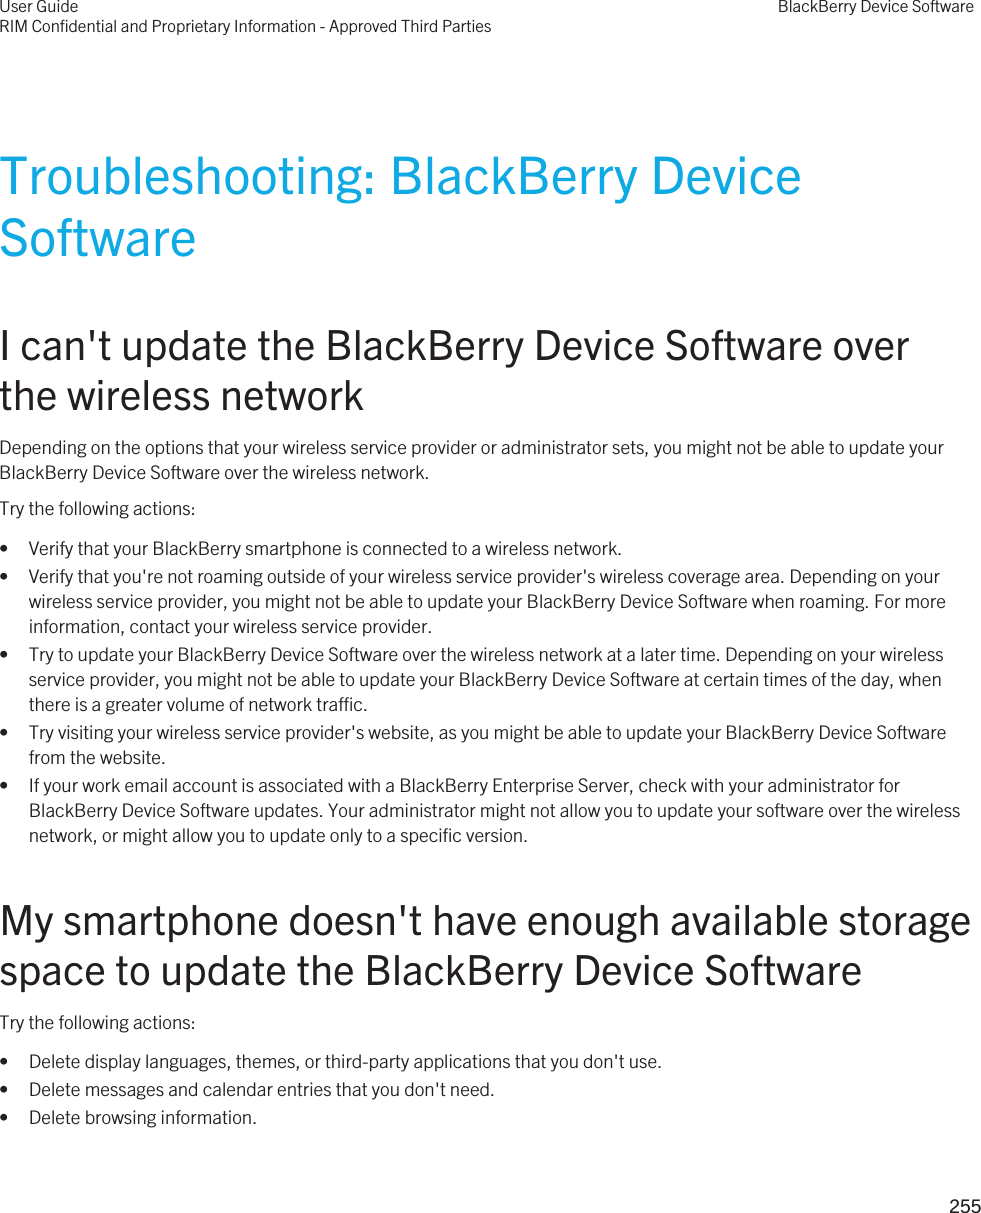 Troubleshooting: BlackBerry Device SoftwareI can&apos;t update the BlackBerry Device Software over the wireless networkDepending on the options that your wireless service provider or administrator sets, you might not be able to update your BlackBerry Device Software over the wireless network.Try the following actions:• Verify that your BlackBerry smartphone is connected to a wireless network.• Verify that you&apos;re not roaming outside of your wireless service provider&apos;s wireless coverage area. Depending on your wireless service provider, you might not be able to update your BlackBerry Device Software when roaming. For more information, contact your wireless service provider.• Try to update your BlackBerry Device Software over the wireless network at a later time. Depending on your wireless service provider, you might not be able to update your BlackBerry Device Software at certain times of the day, when there is a greater volume of network traffic.• Try visiting your wireless service provider&apos;s website, as you might be able to update your BlackBerry Device Software from the website.• If your work email account is associated with a BlackBerry Enterprise Server, check with your administrator for BlackBerry Device Software updates. Your administrator might not allow you to update your software over the wireless network, or might allow you to update only to a specific version.My smartphone doesn&apos;t have enough available storage space to update the BlackBerry Device SoftwareTry the following actions:• Delete display languages, themes, or third-party applications that you don&apos;t use.• Delete messages and calendar entries that you don&apos;t need.• Delete browsing information.User GuideRIM Confidential and Proprietary Information - Approved Third PartiesBlackBerry Device Software255 